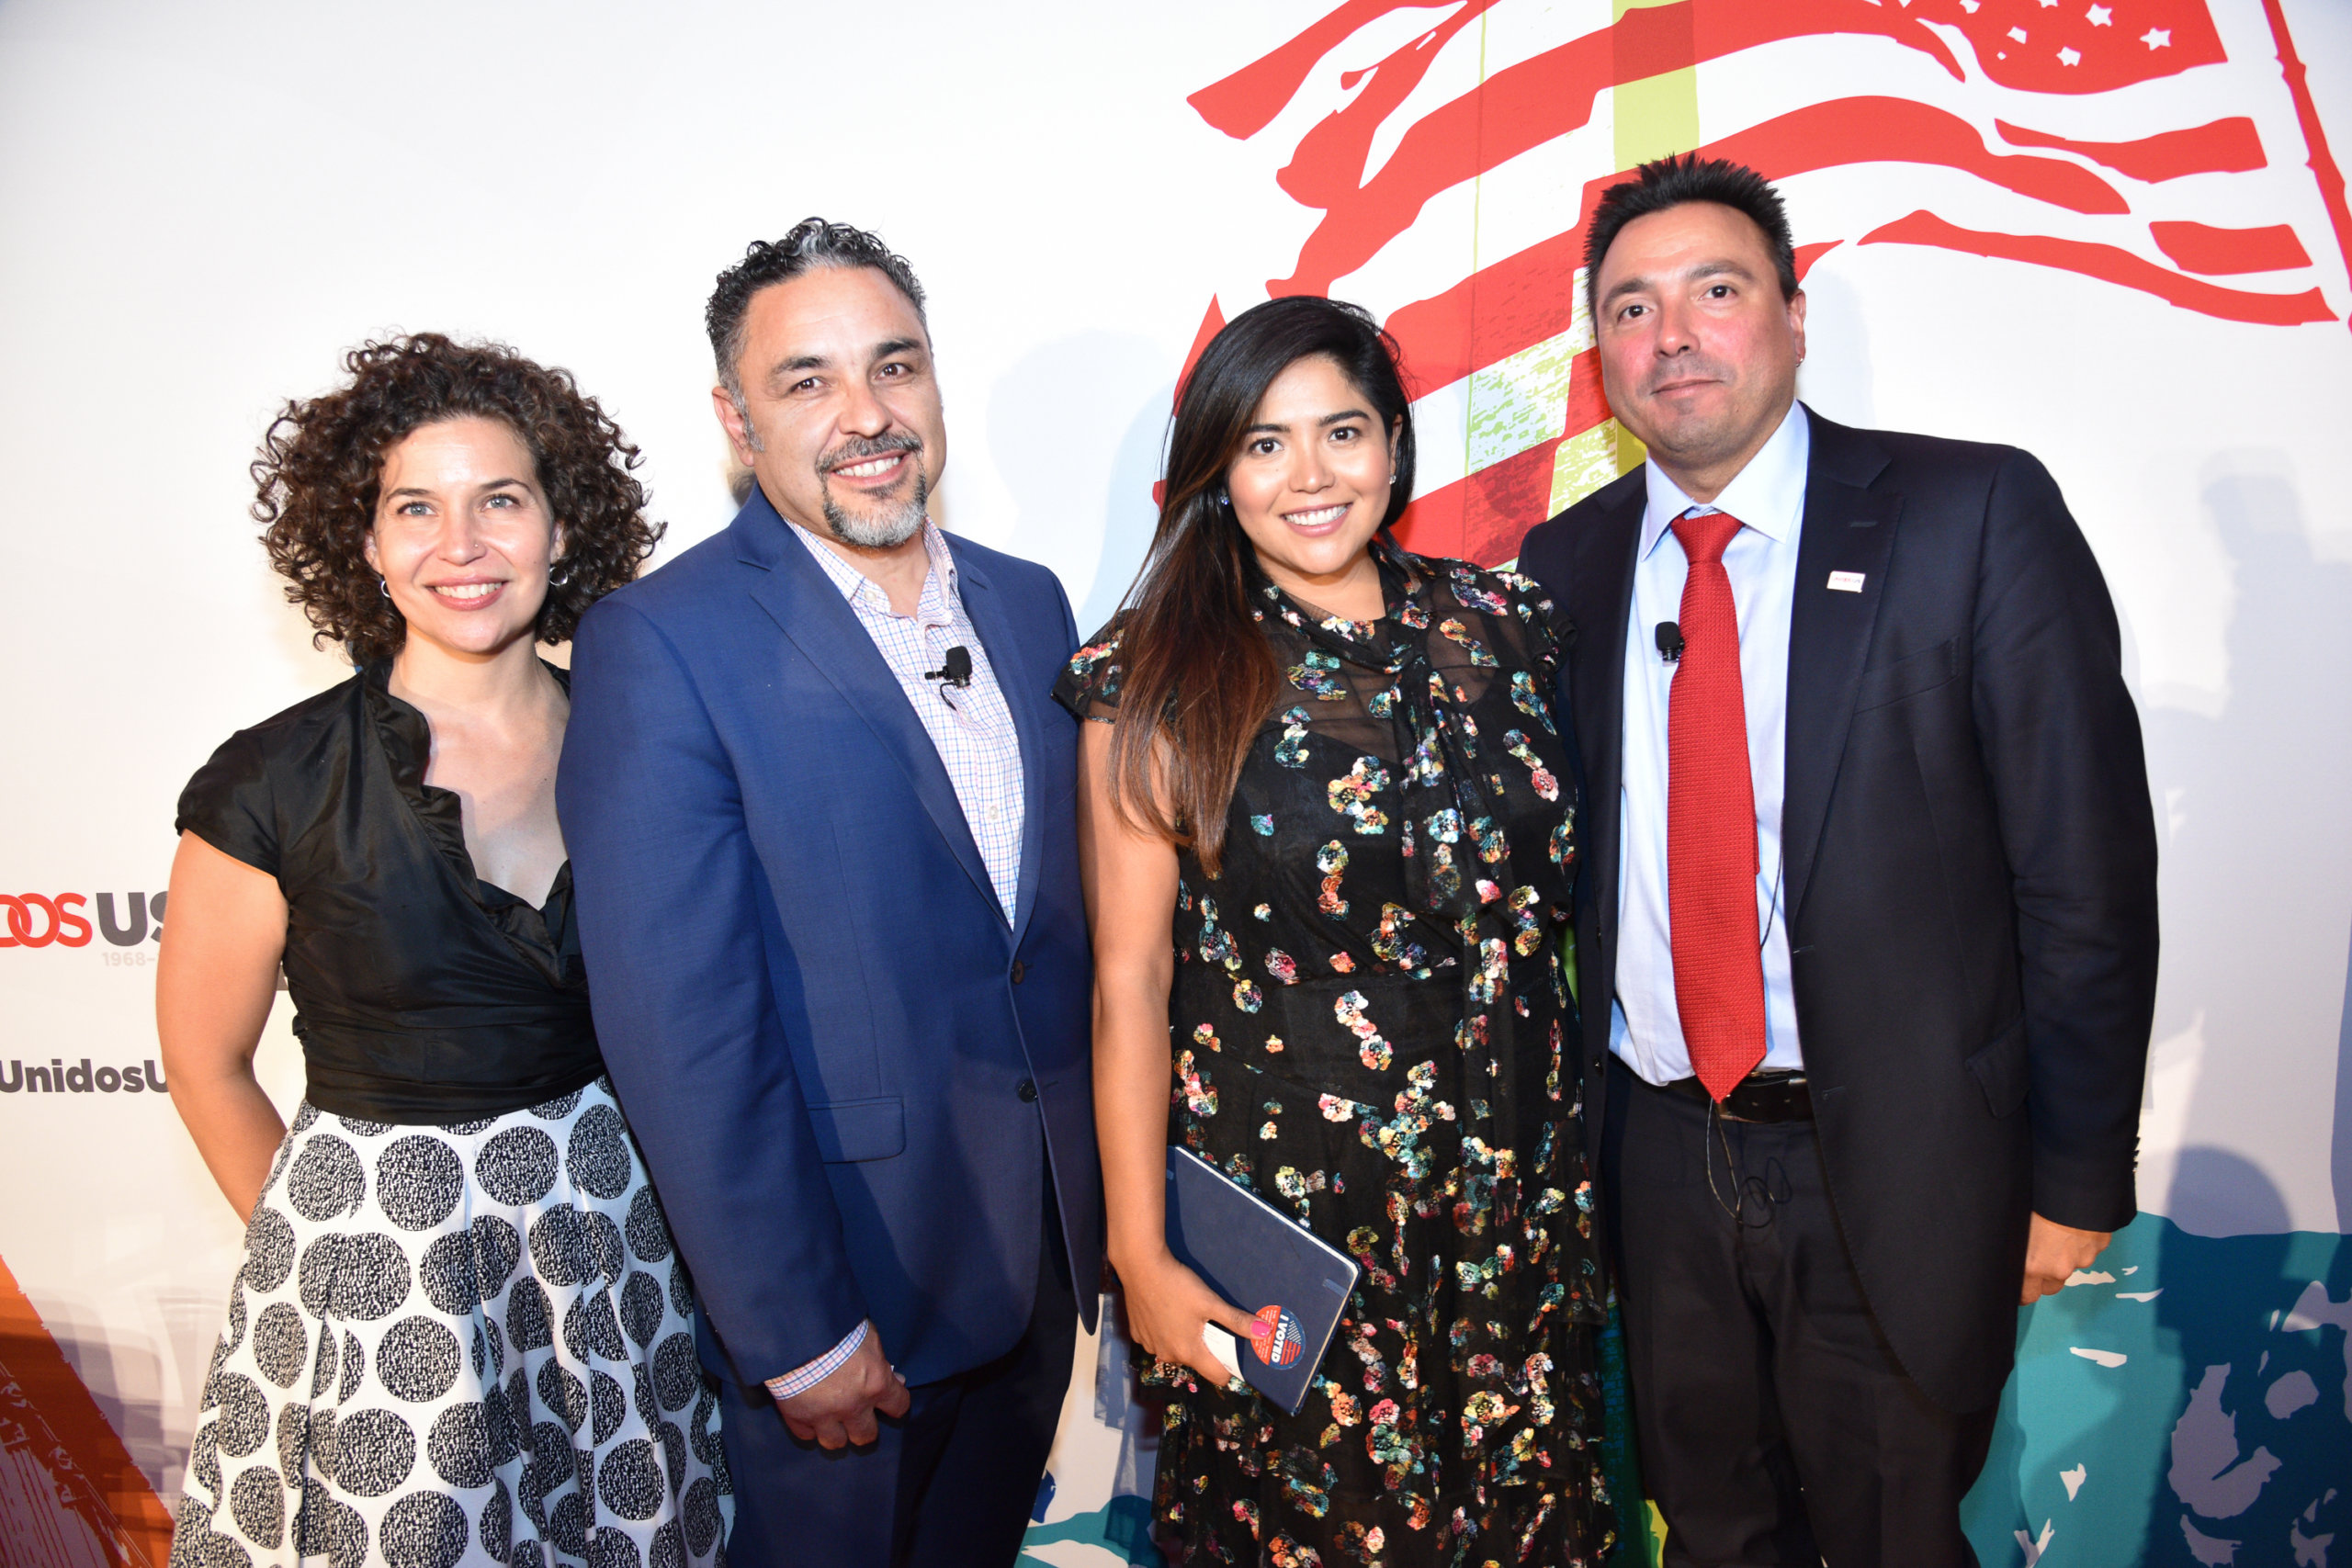 From left: Janis joined UnidosUS Affiliate Mission Asset Fund Founder and CEO José Quiñonez; activist, writer, and producer Julissa Arce, and UnidosUS Senior Vice President for Policy and Advocacy Eric Rodriguez at the 2018 UnidosUS Annual Conference.